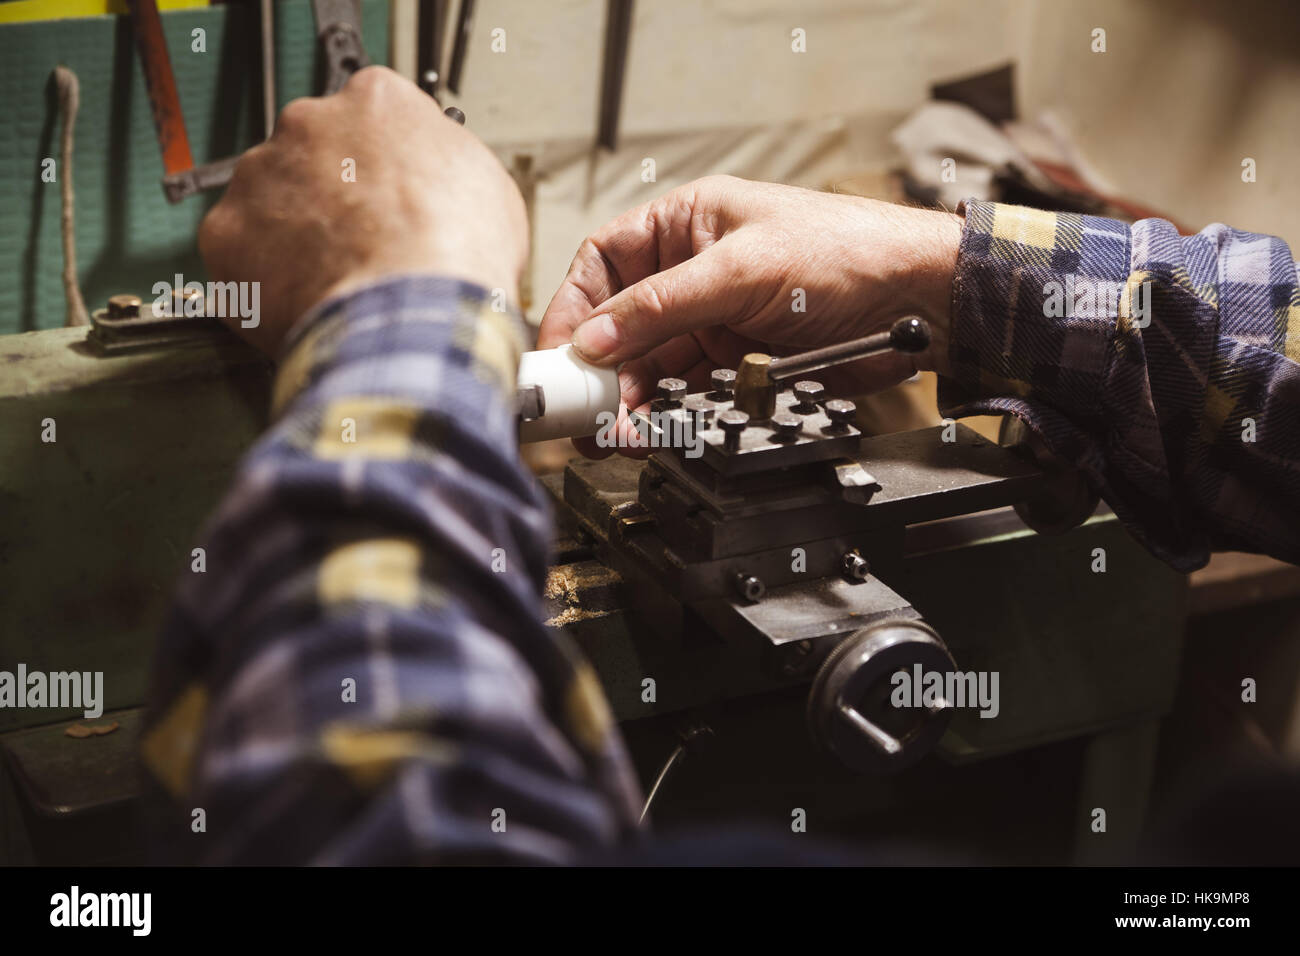 man's hands hold detail on lathe Stock Photo